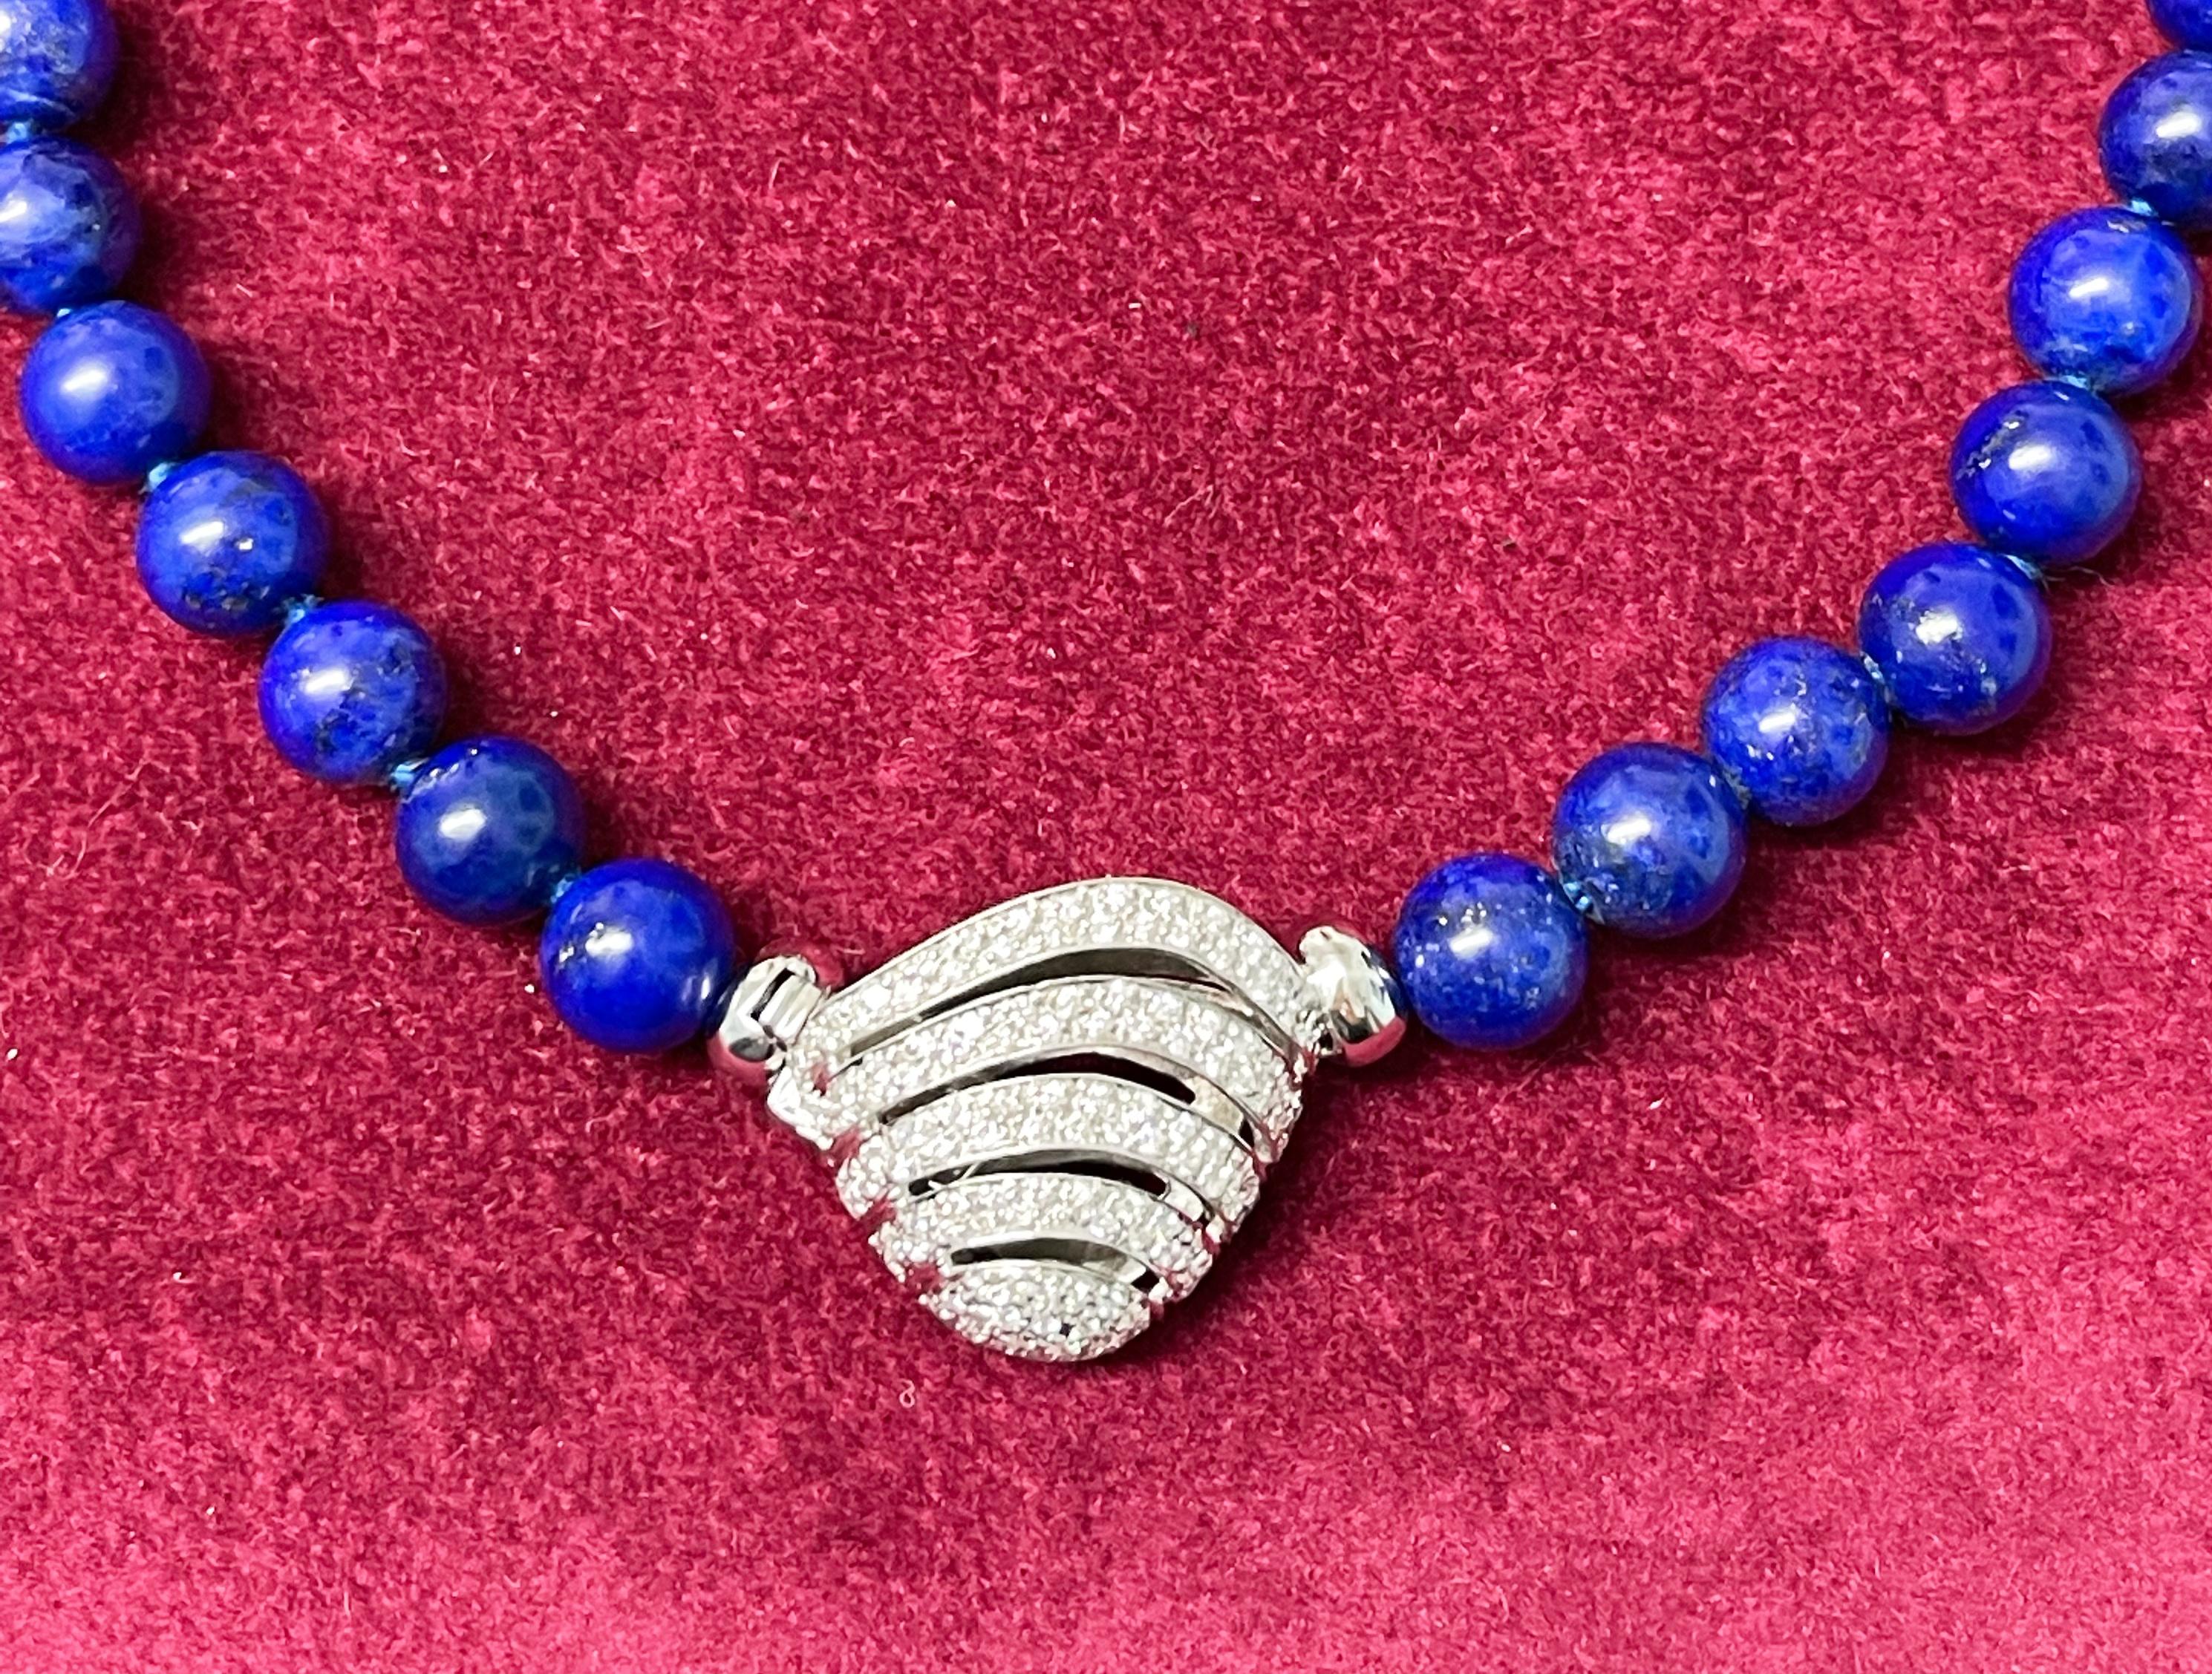 This beautiful and brilliant necklace features an exquisite strand of blue  lapis lazuli sphere and a 18 Karat White Gold special clasp that its covered by shining diamonds that makes this necklace an unique attire to any person.
Thanks to the deep